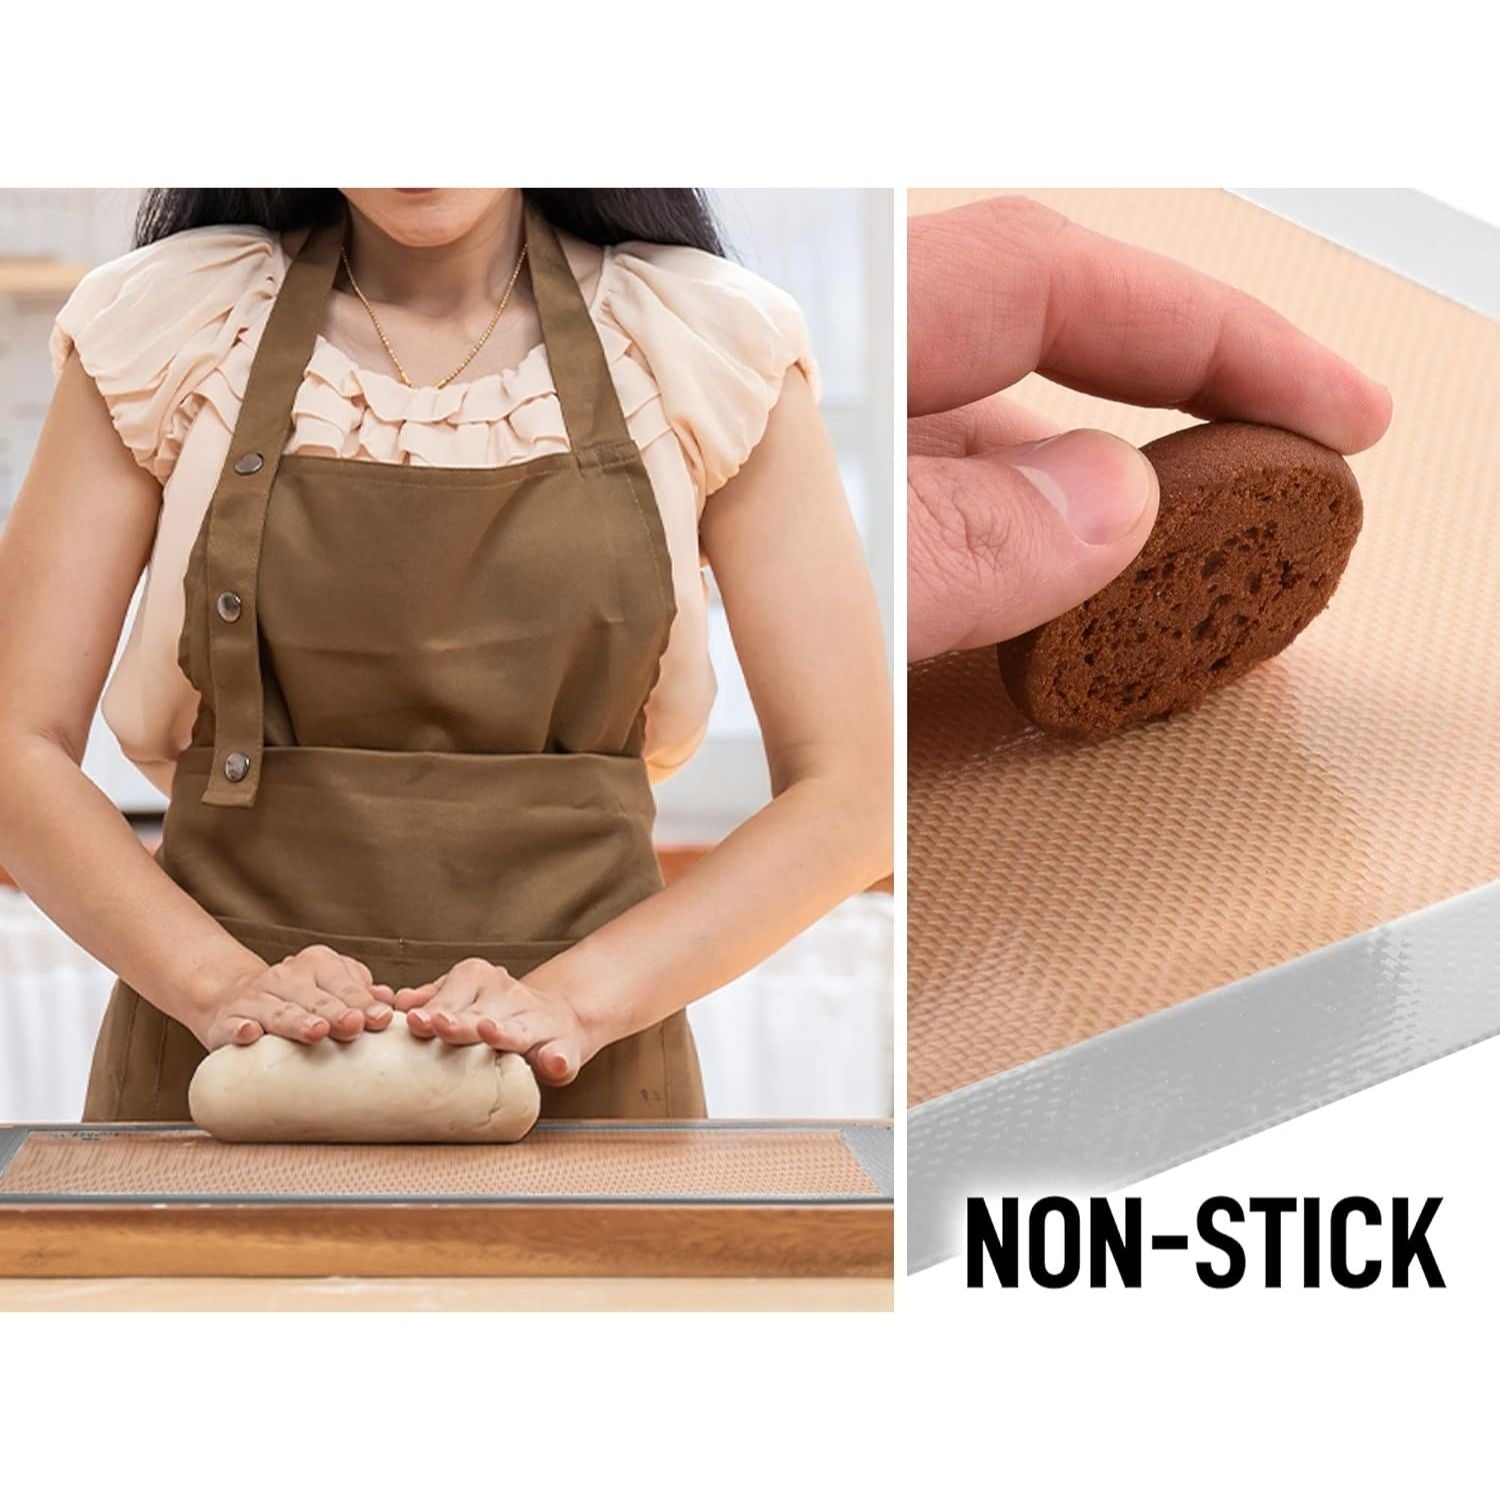 What Are Silicone Baking Mats And How To Use It For Baking And Cooking